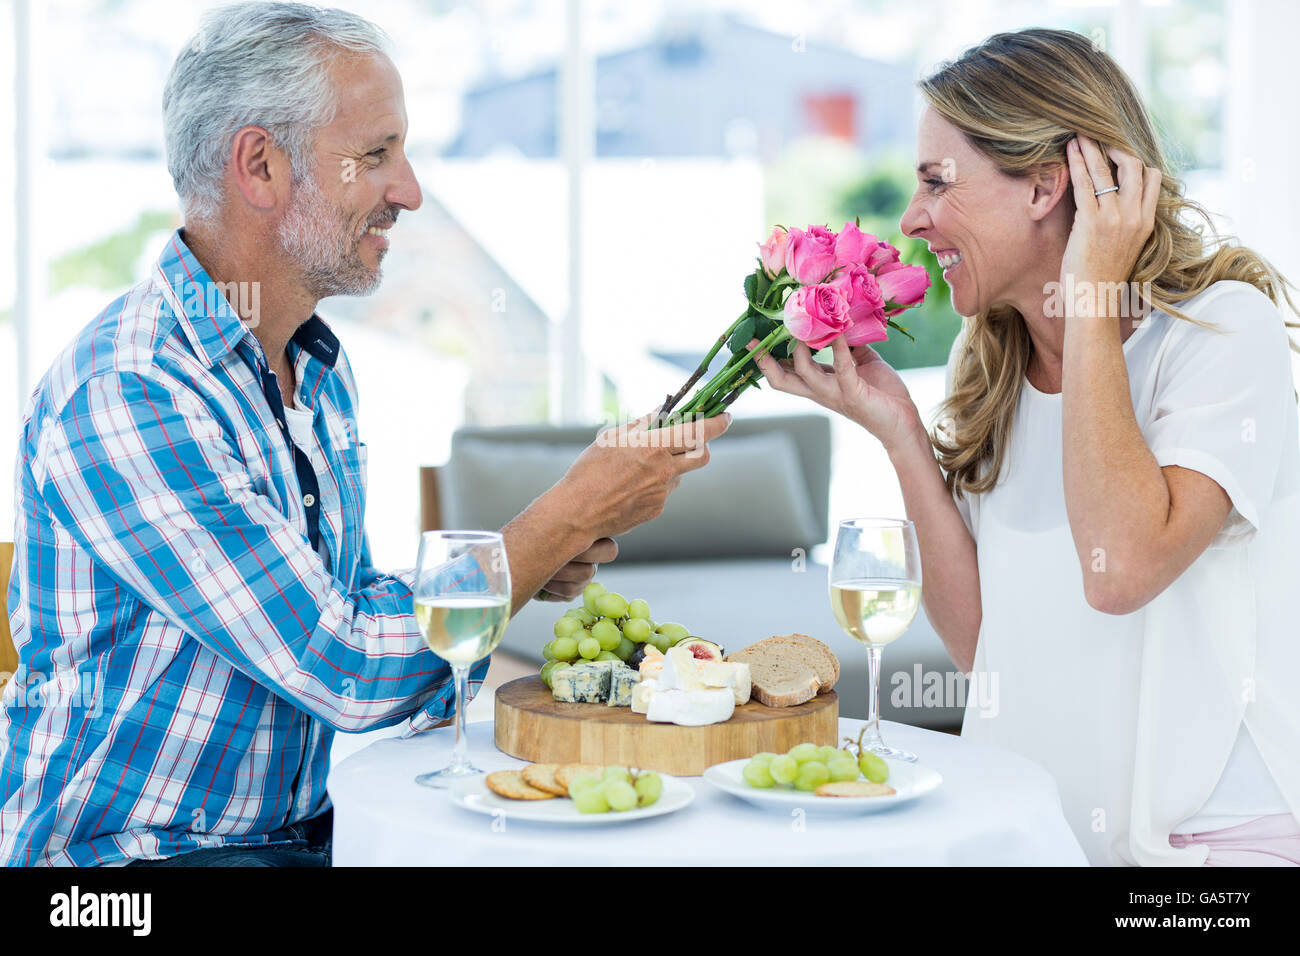 Man giving pink roses to wife in restaurant Stock Photo